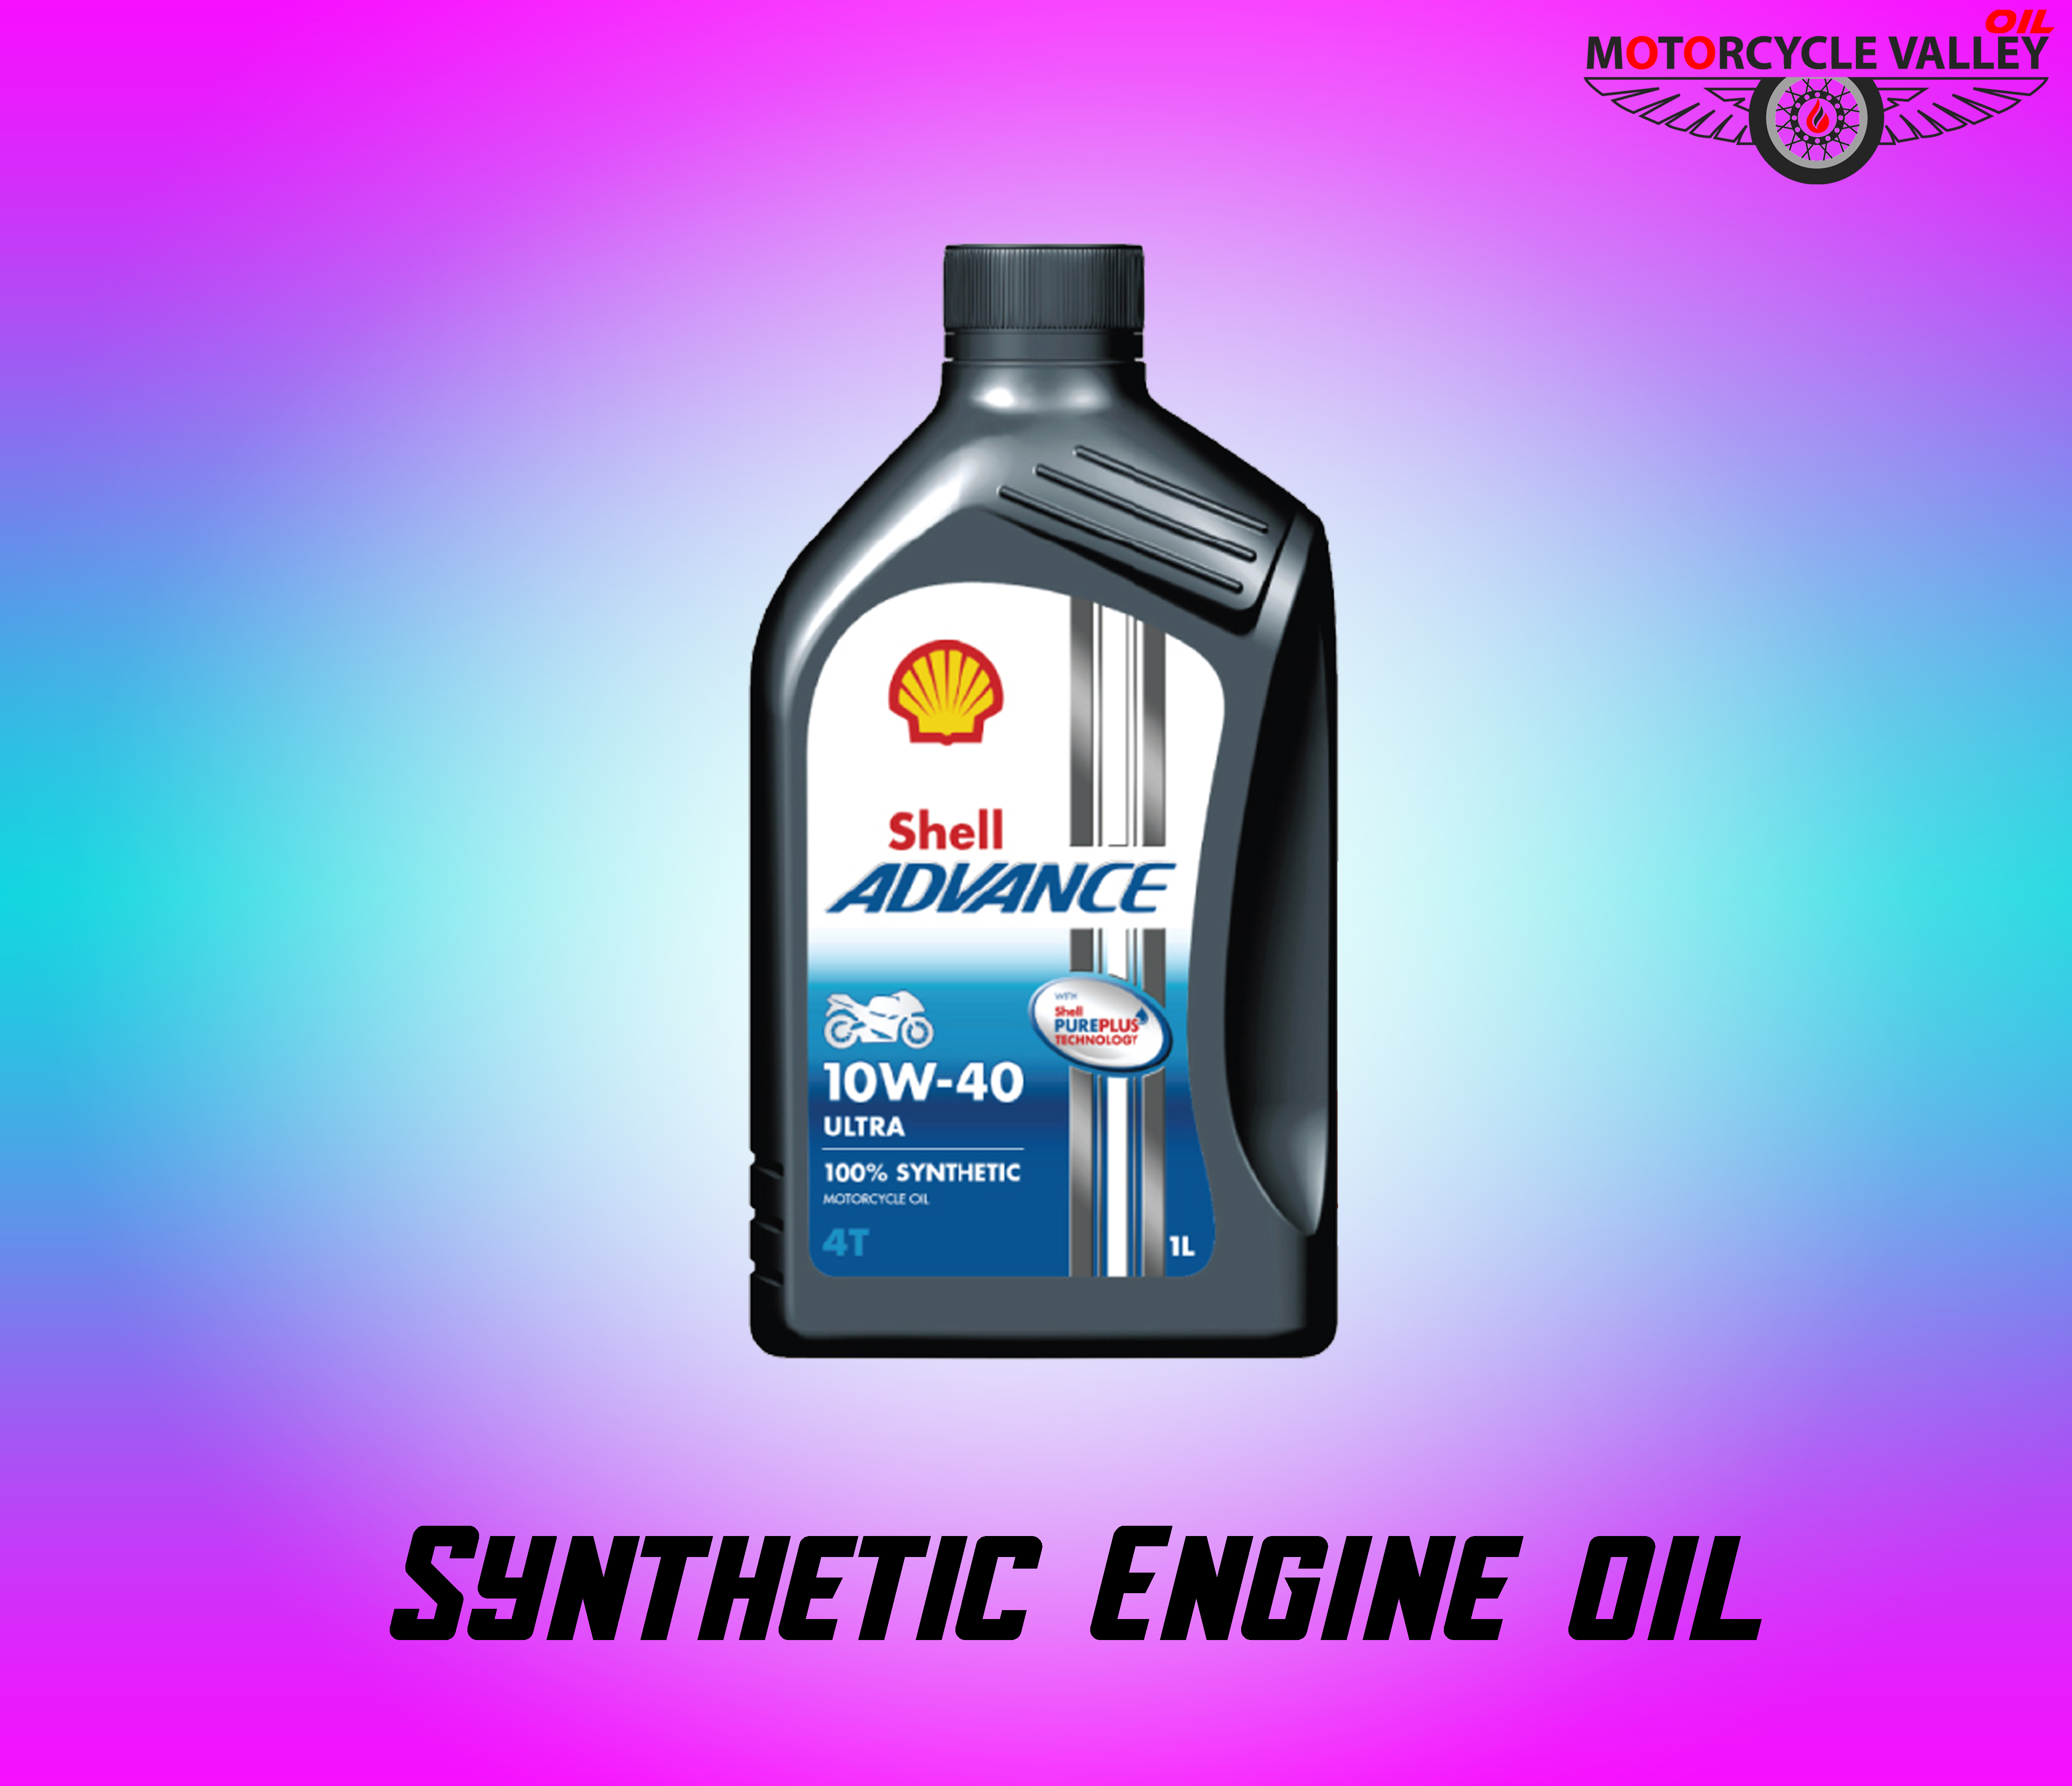 synthetic engine oil-1632207164.jpg